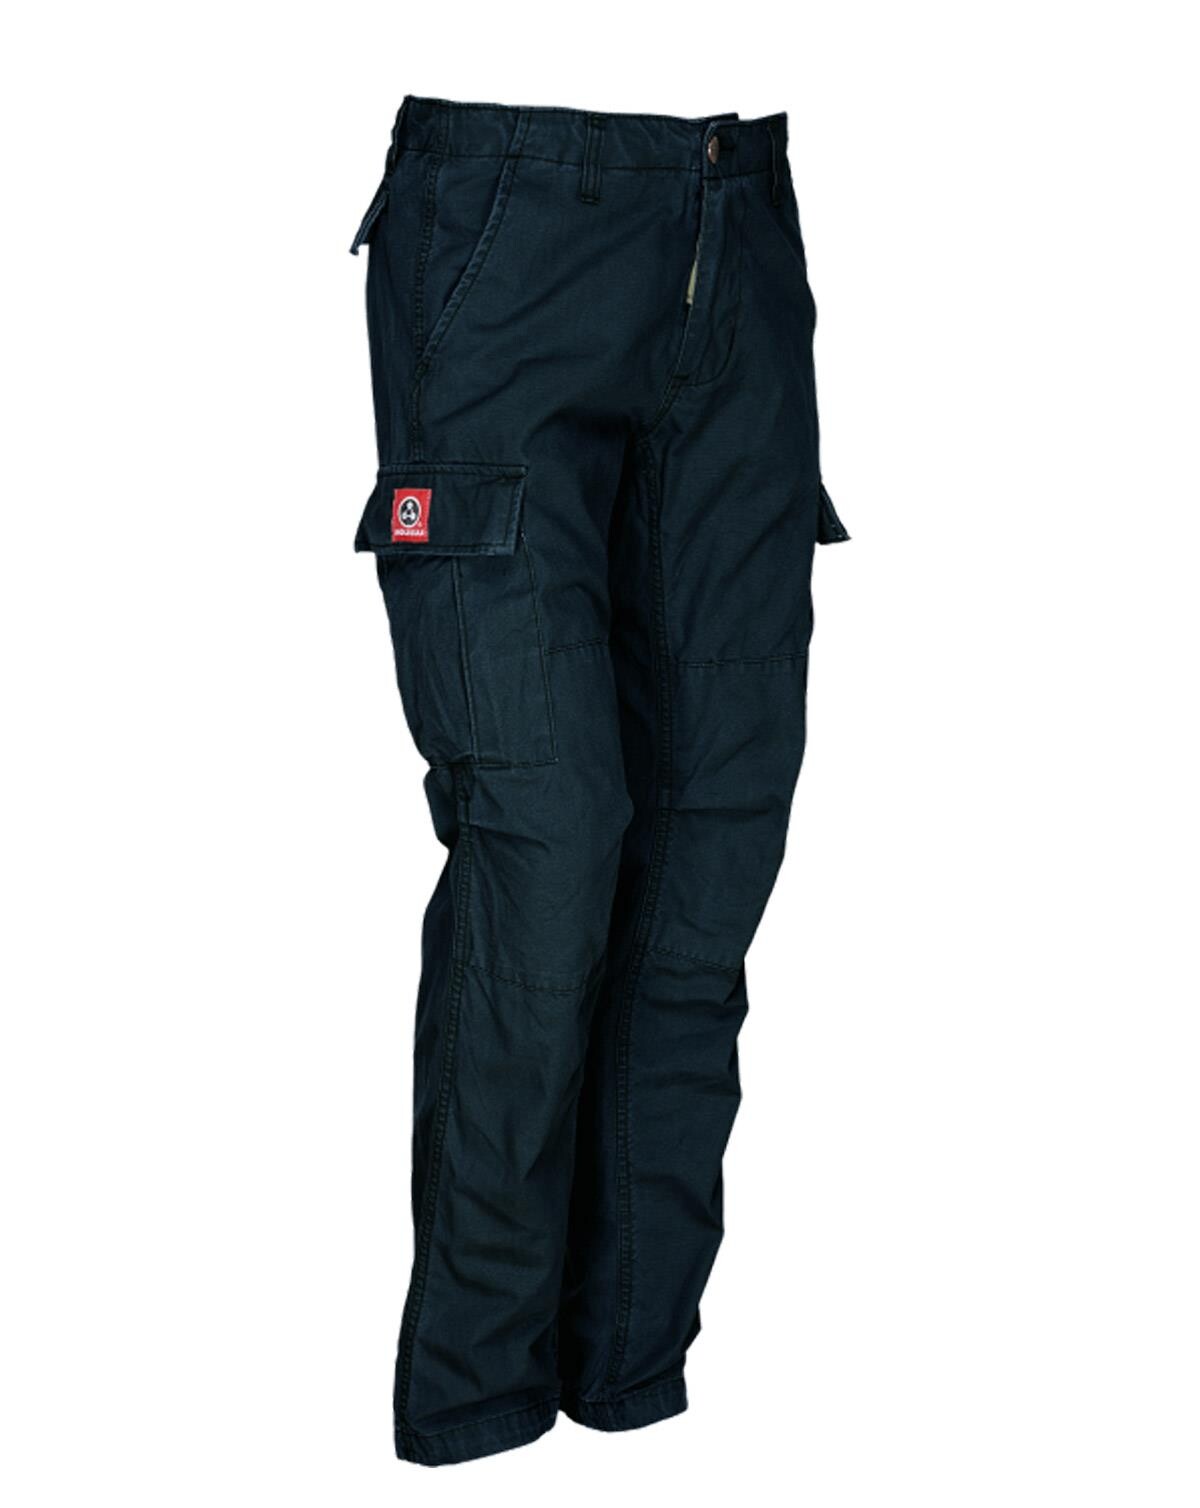 12: Molecule Heavy Outdoors Pant (Navy, Large / W35-38)